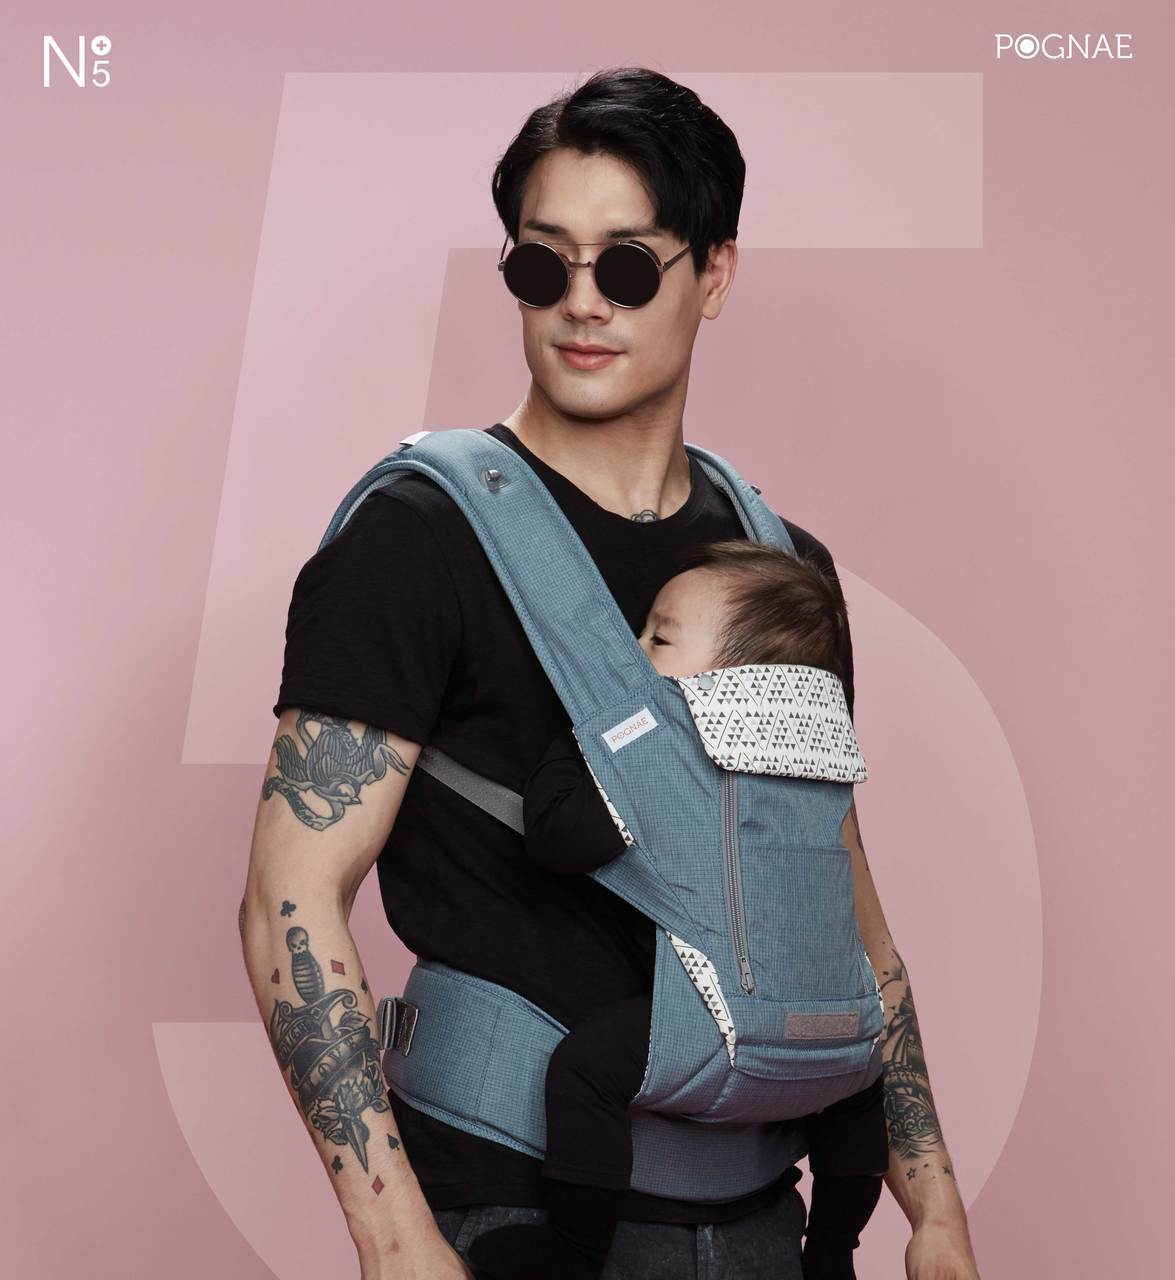 Pognae No.5 Plus Beyond All in One Baby Carrier